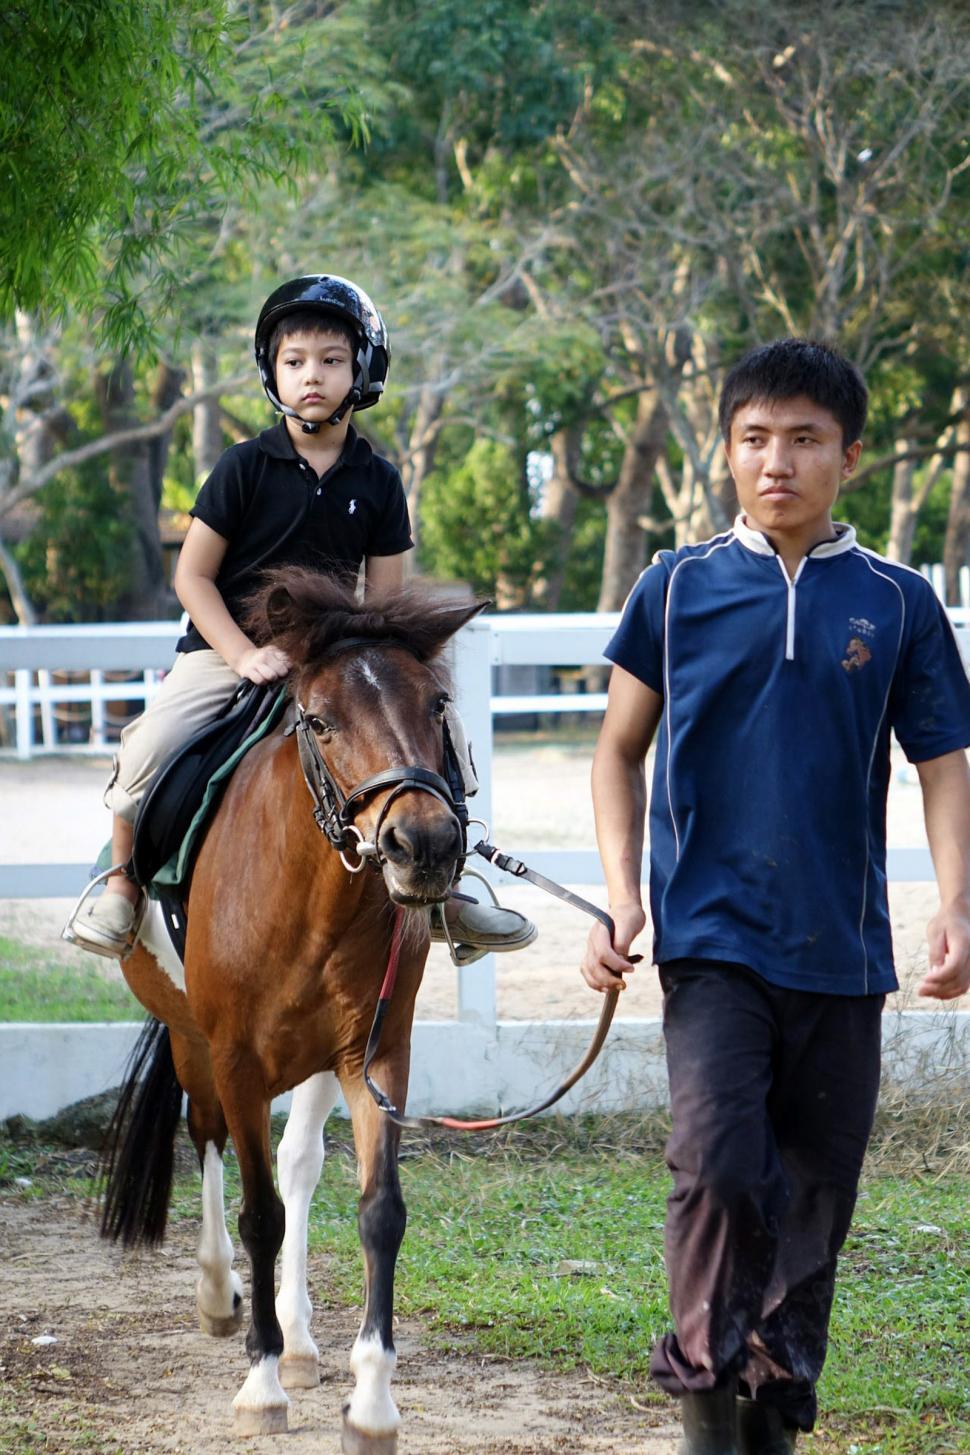 Free Image of Young Boy Riding on Brown and White Horse 